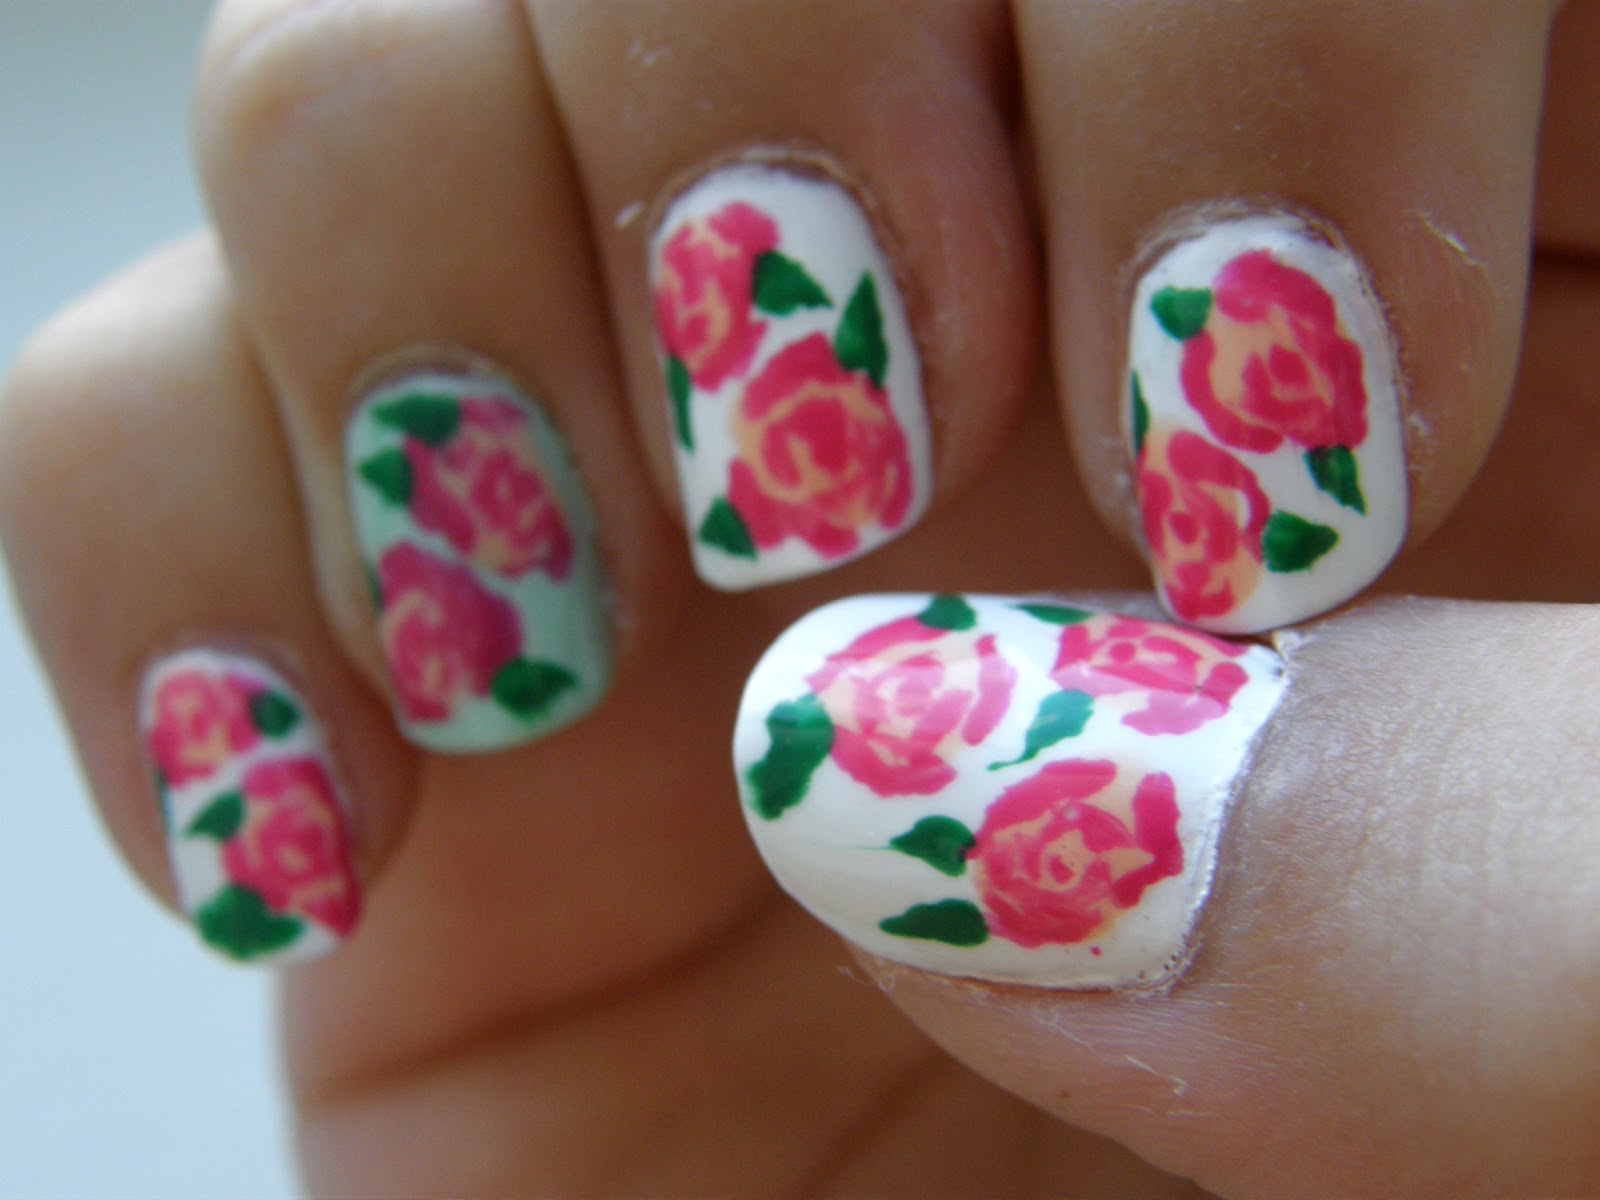 4. 1950s Inspired Nail Design - wide 5